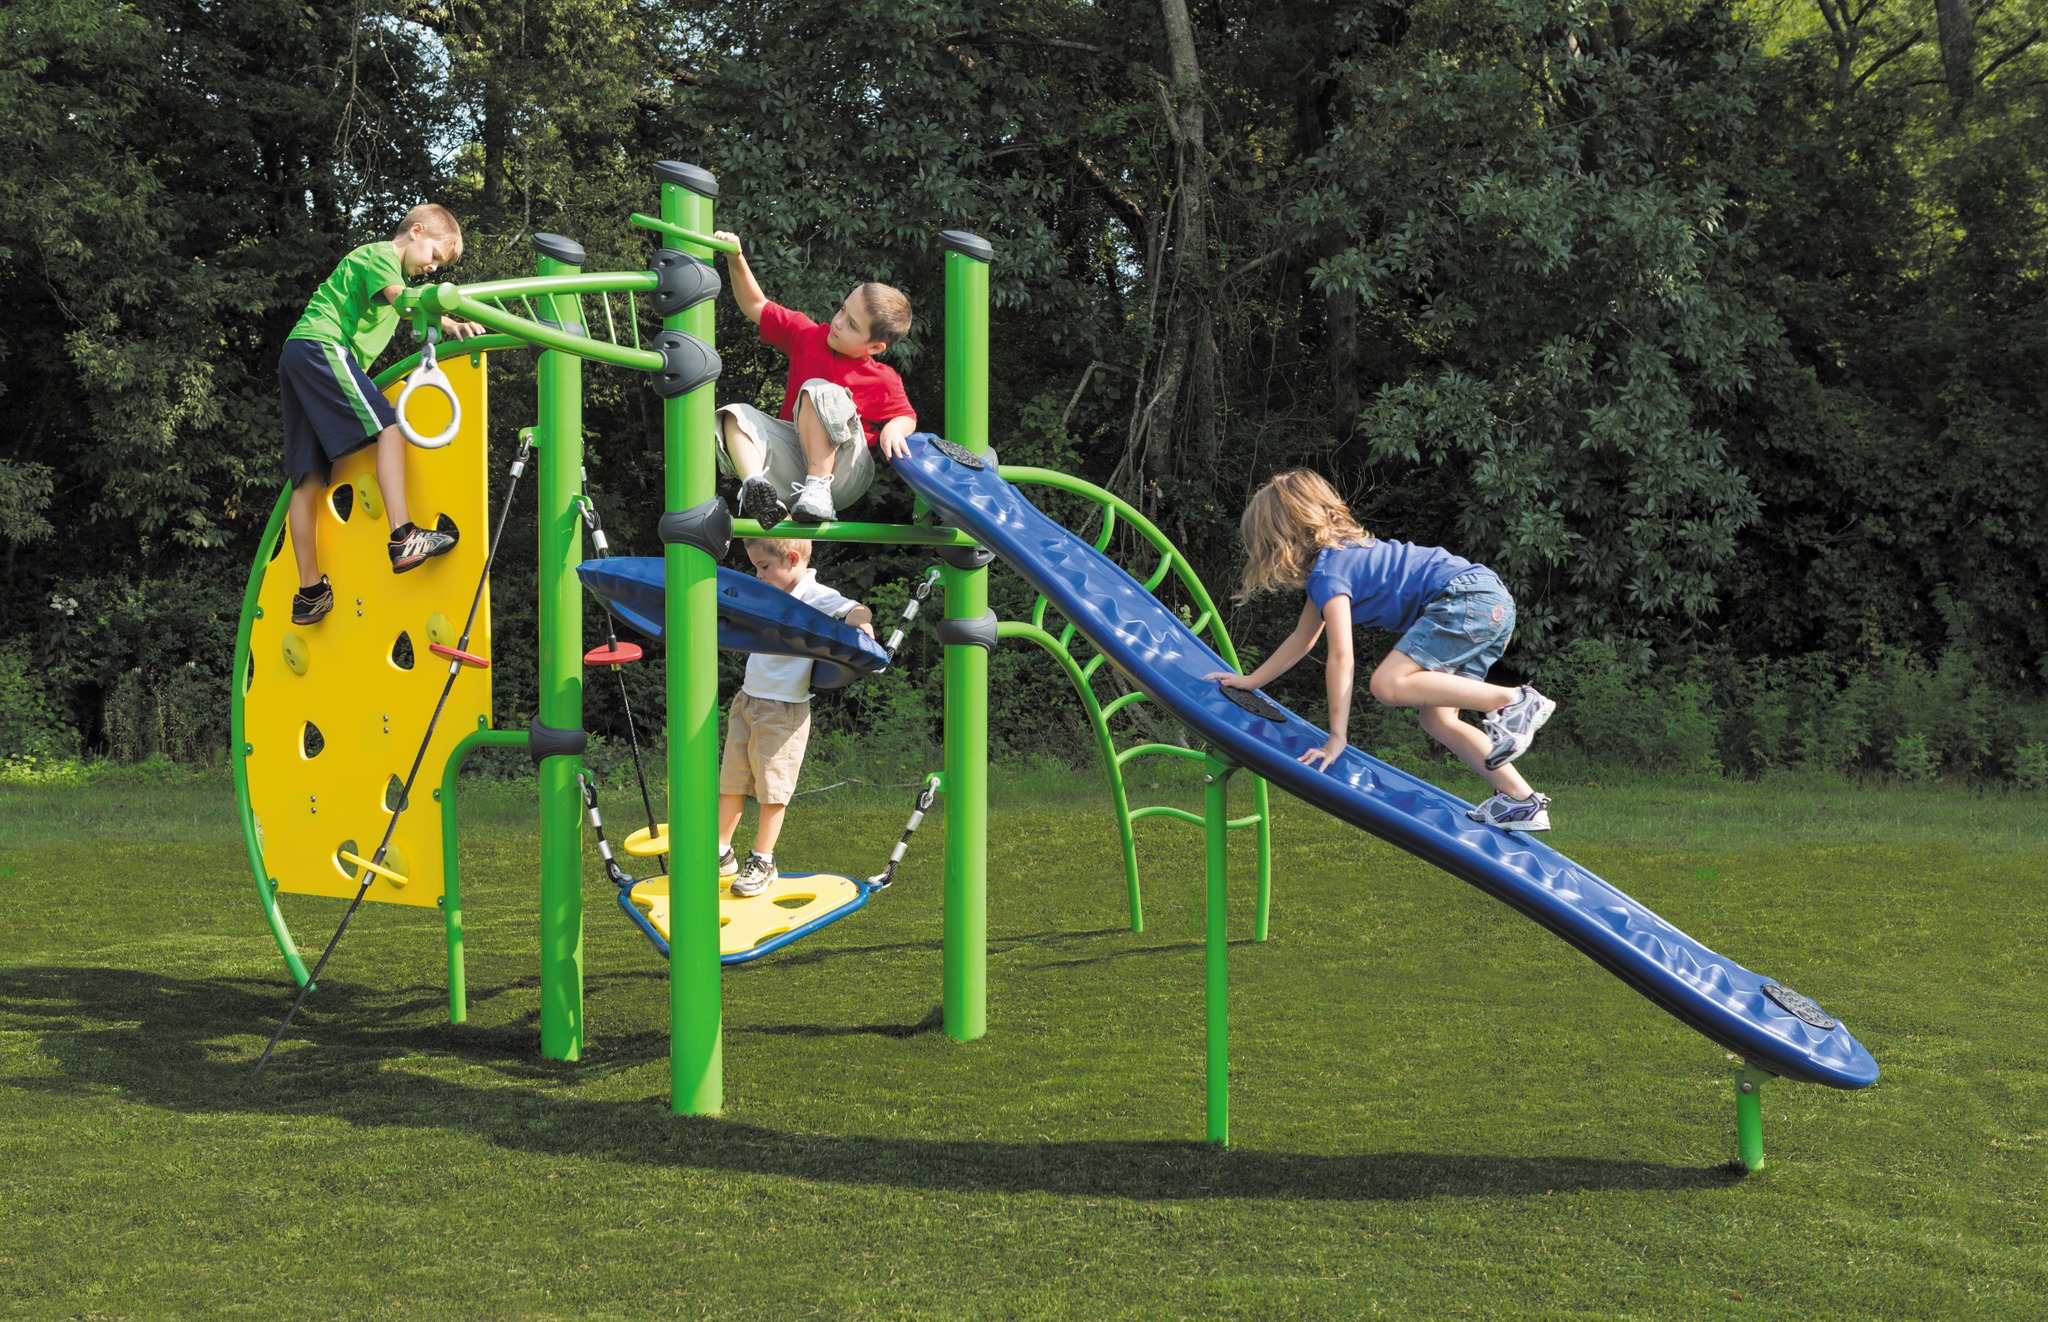 Why do playgrounds help develop children’s self-control?